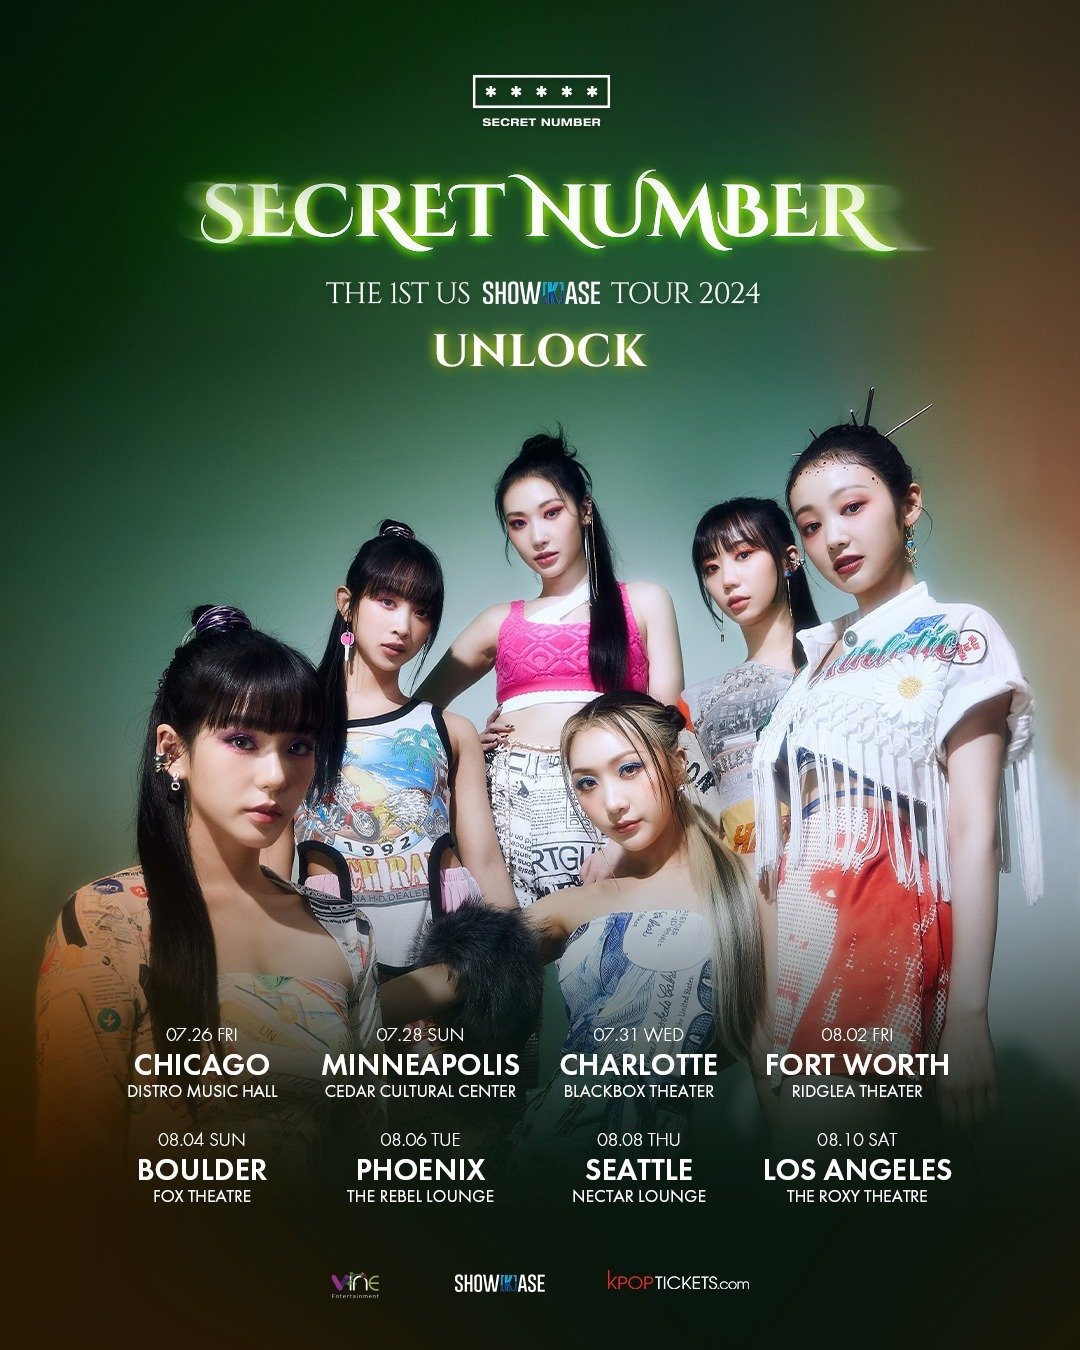 Studio PAV Presents: 
SECRET NUMBER ~ The 1st US Show(K)ase Tour 2024: UNLOCK
Sunday, July 28, 2024 / Doors: 6:30 PM / Show: 7:00 PM
All Ages
Standing
$39 General Admission + various add-ons
🎟 Tickets + add-ons on sale now! Head to our Linktree!